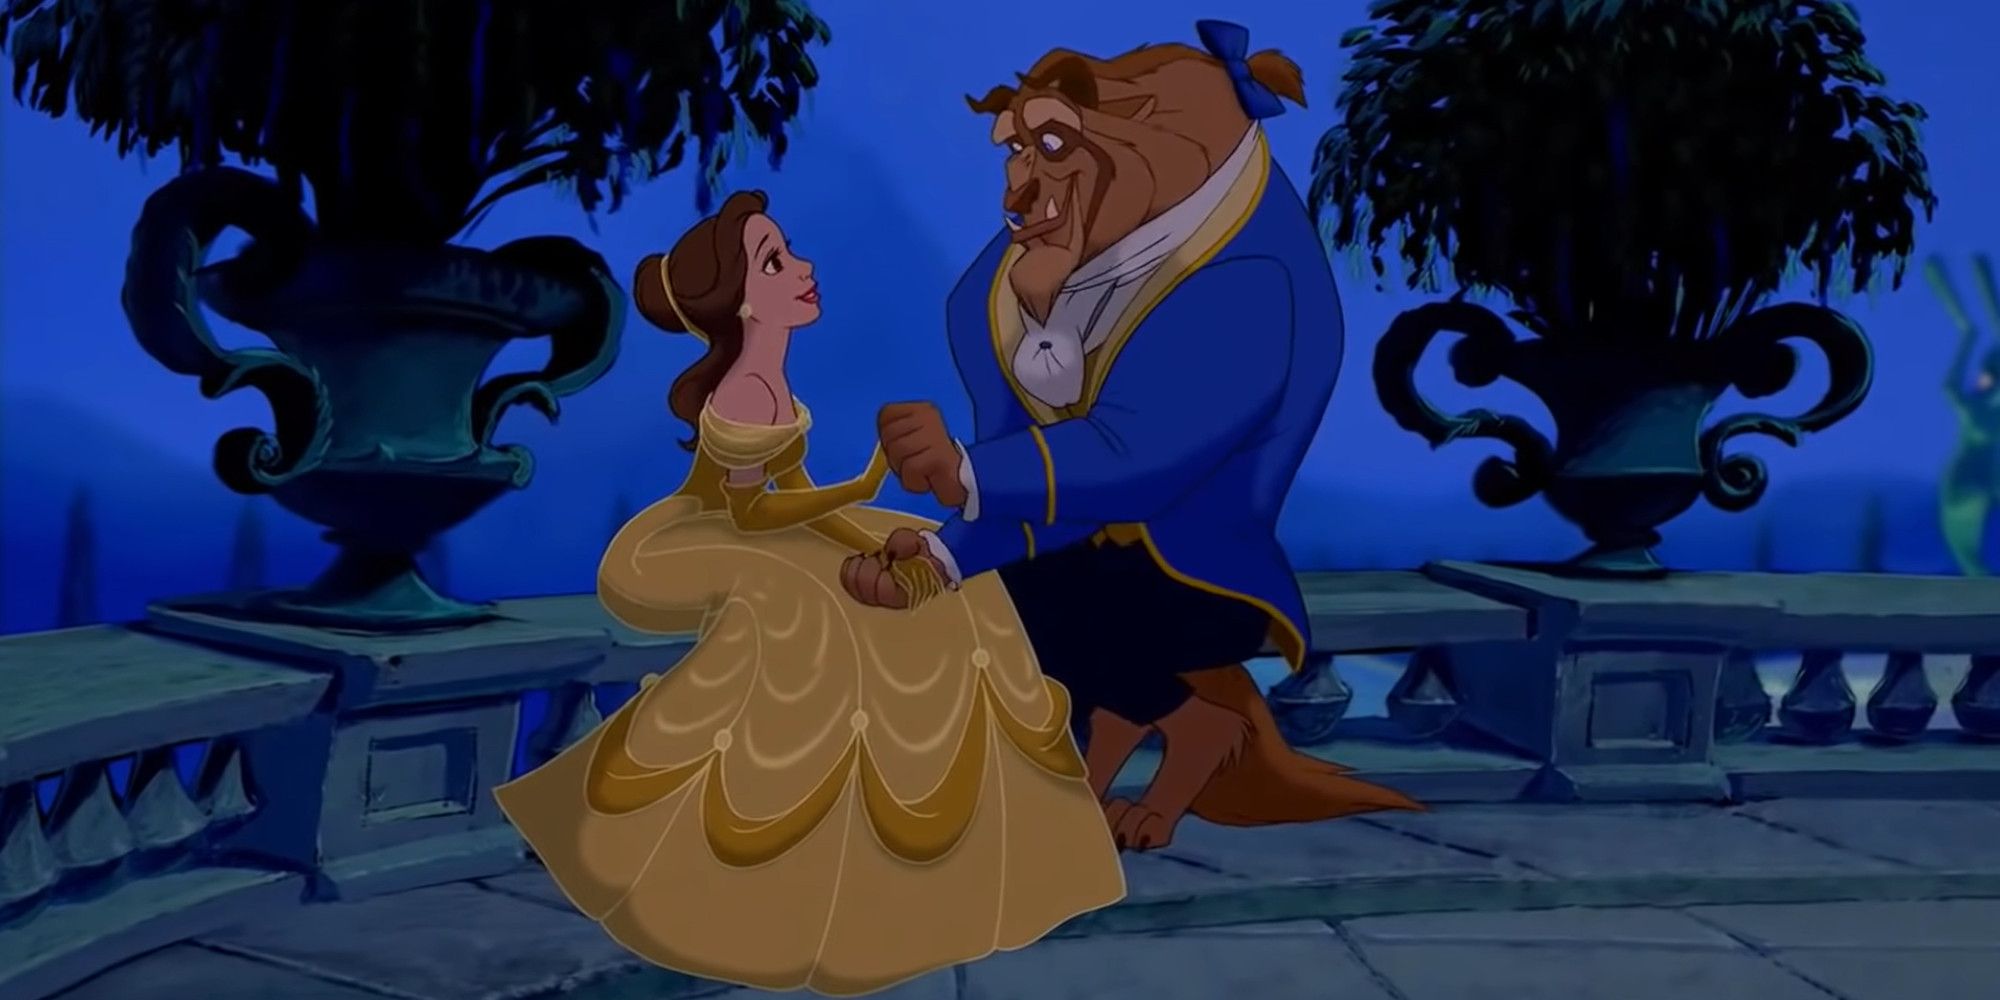 Beauty and the Beast tale as old as time outdoor scene